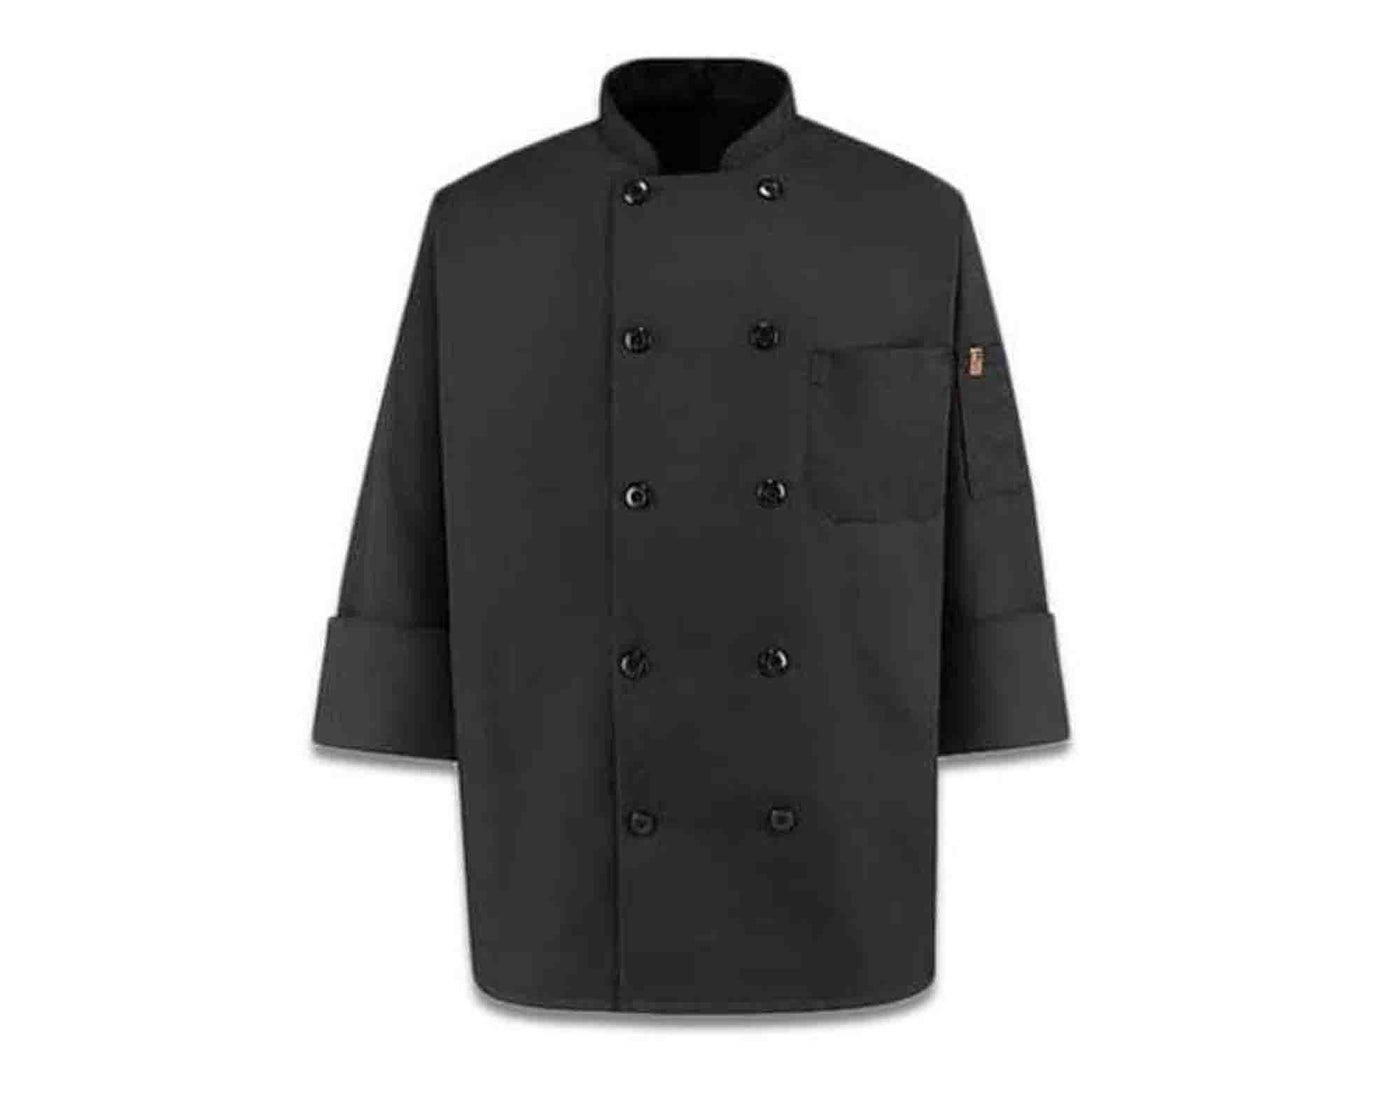 Black chef coat with plastic solid button